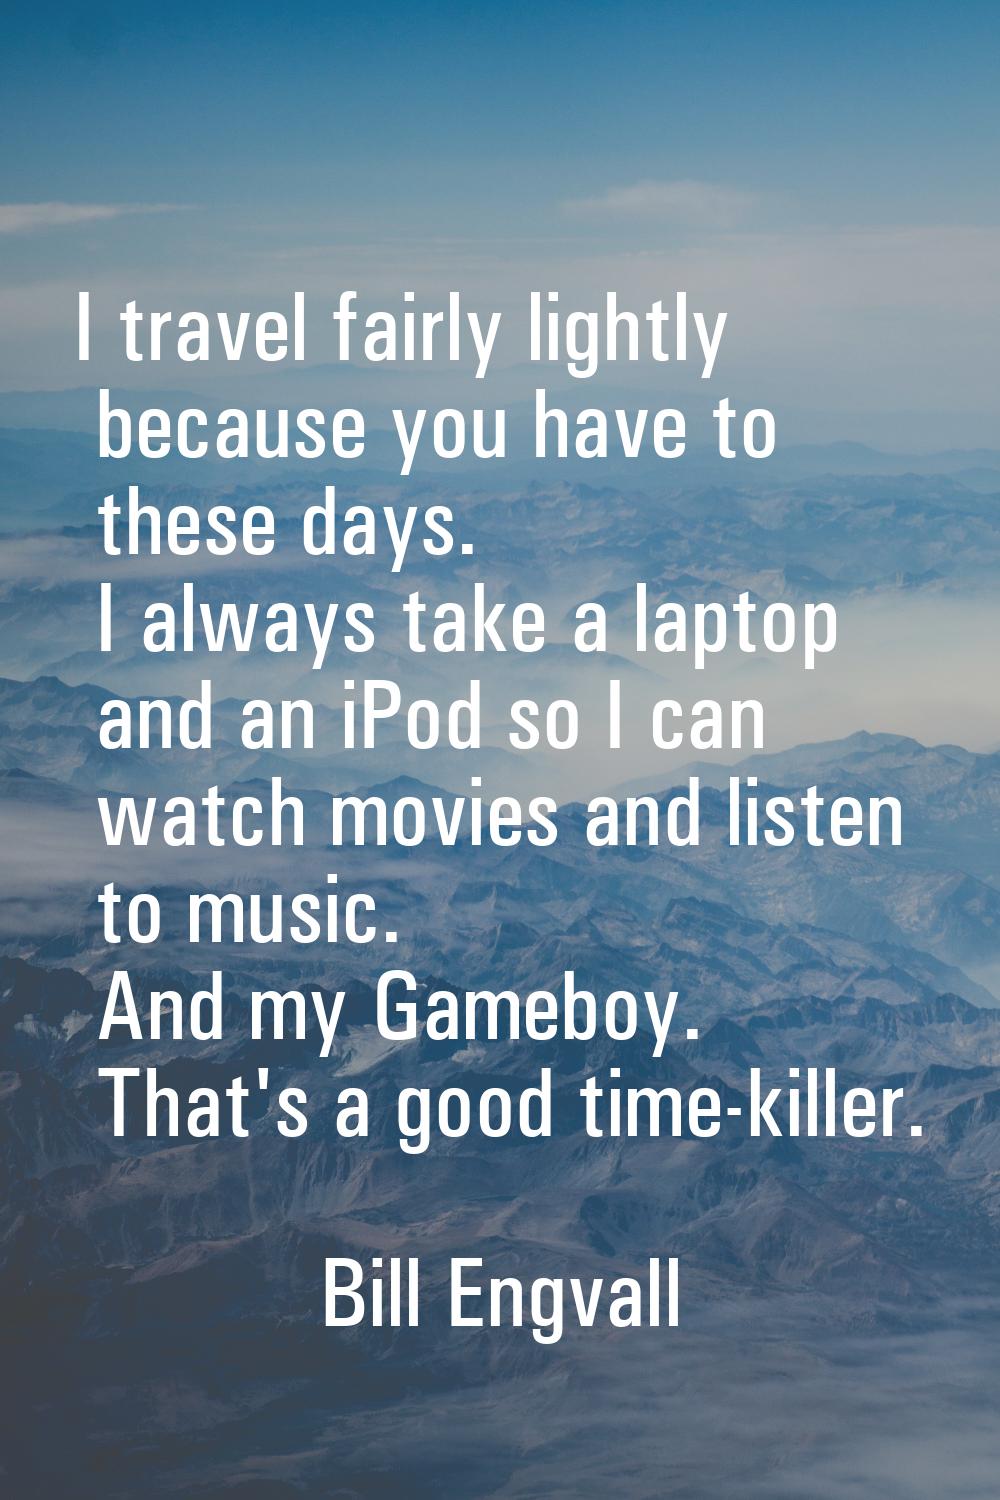 I travel fairly lightly because you have to these days. I always take a laptop and an iPod so I can